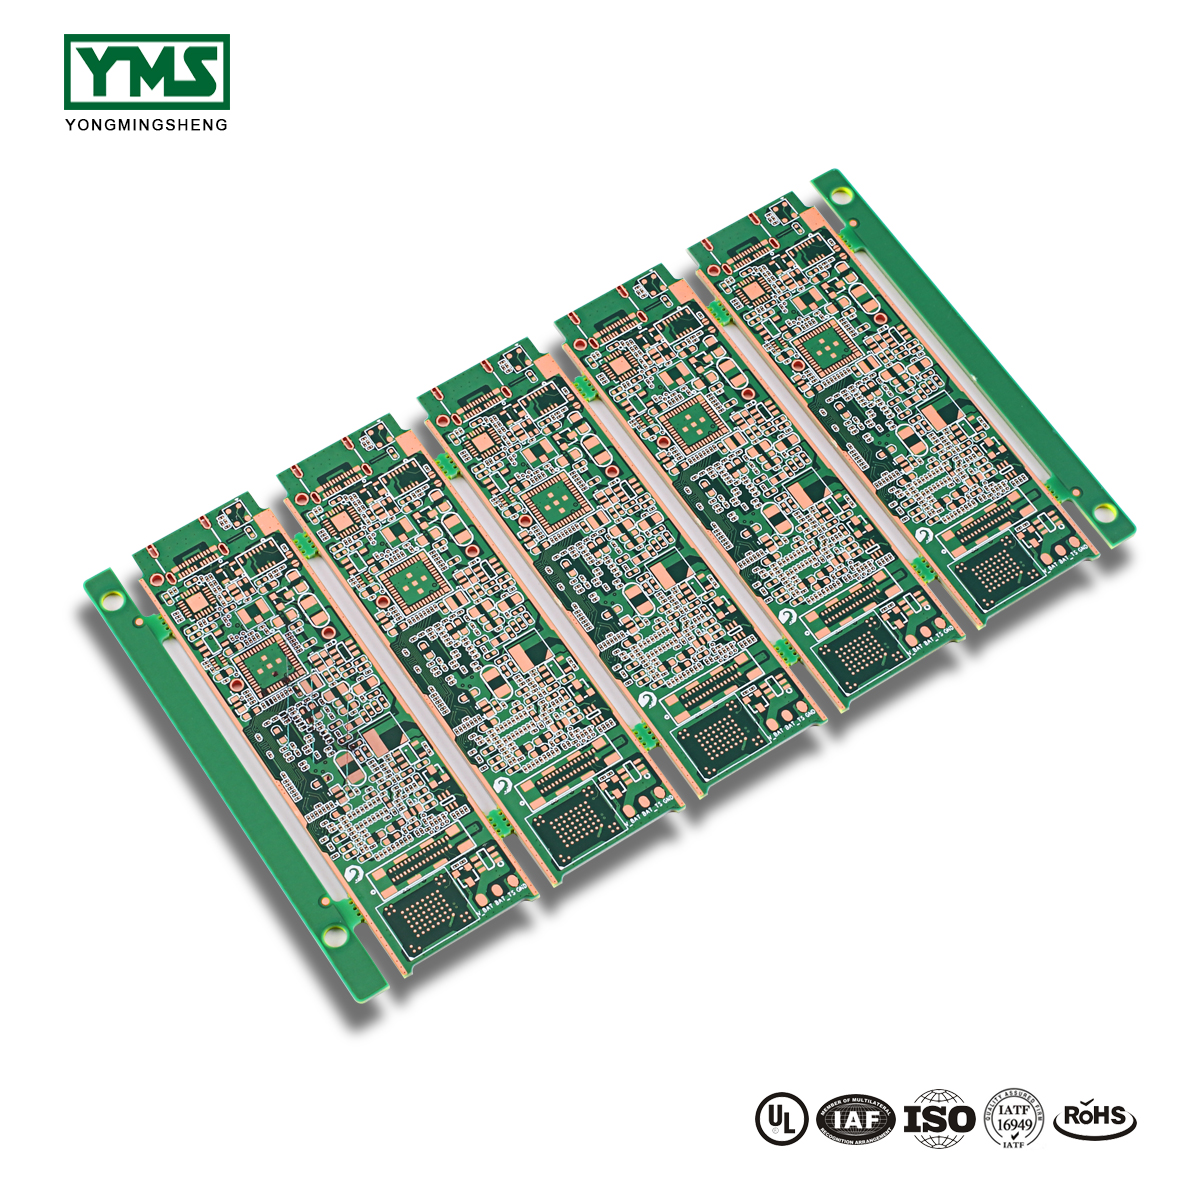 Hot New Products Special Technology Pcb - 12 Layer 2 Step HDI Board | YMS PCB – Yongmingsheng